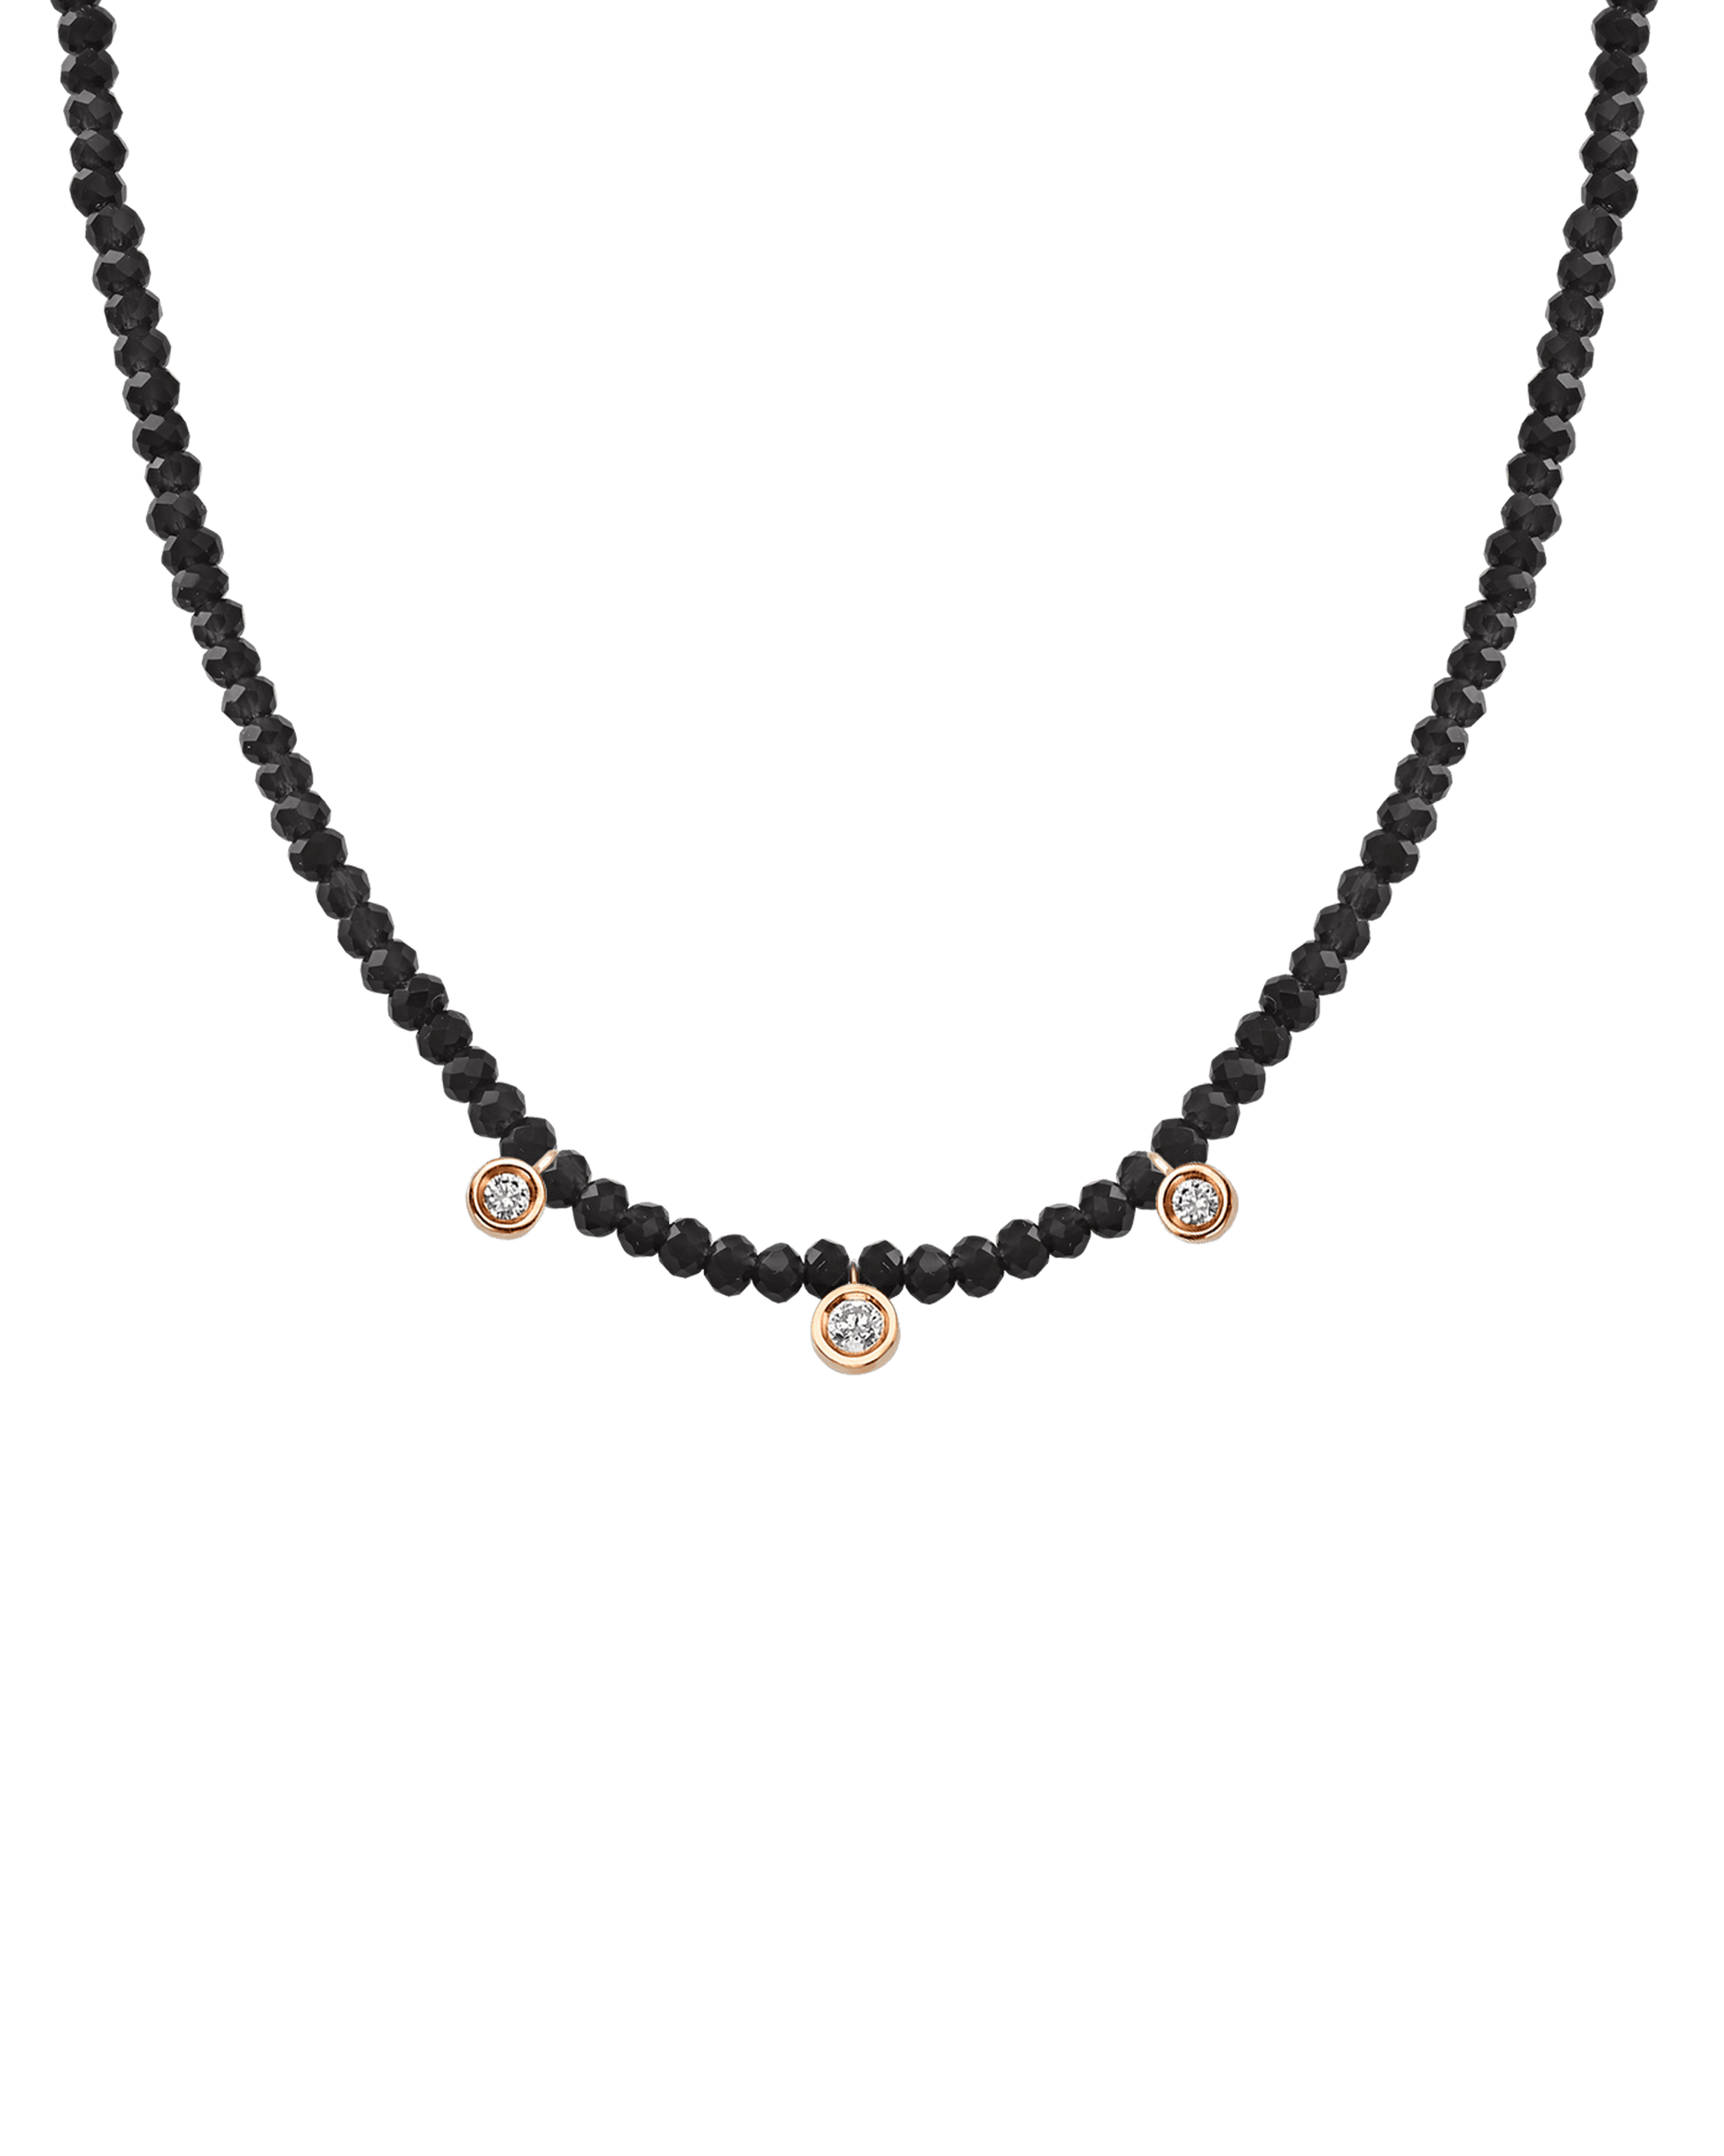 Blue Lapis Gemstone & Three diamonds Necklace - 14K Rose Gold Necklaces magal-dev Glass Beads Black Spinnel 14" - Collar 